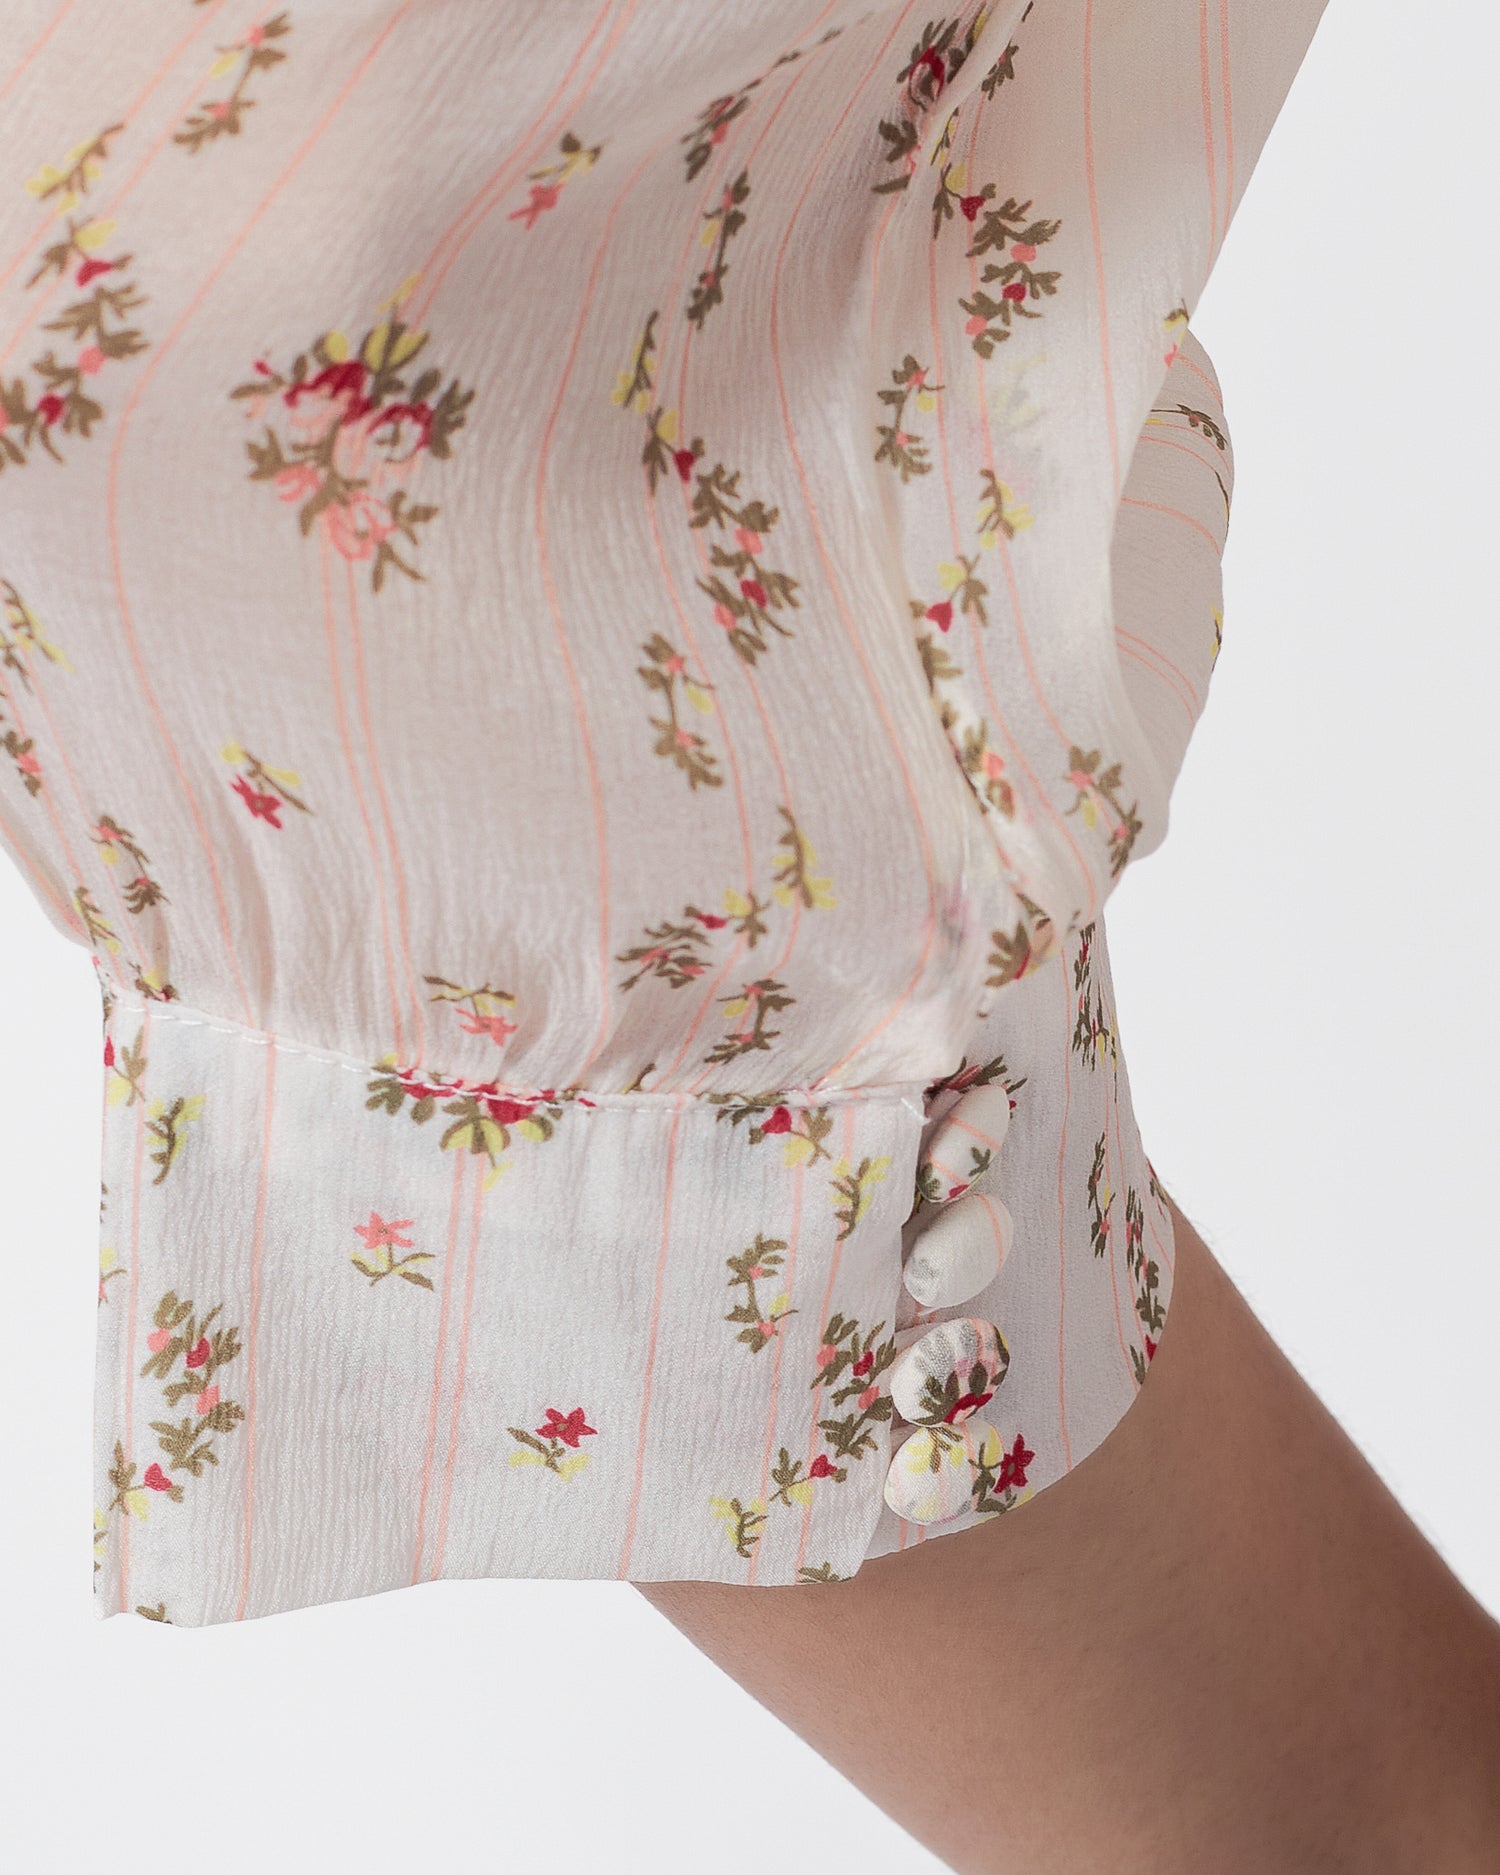 Floral Over Printed Lady Shirts Short Sleeve 14.90